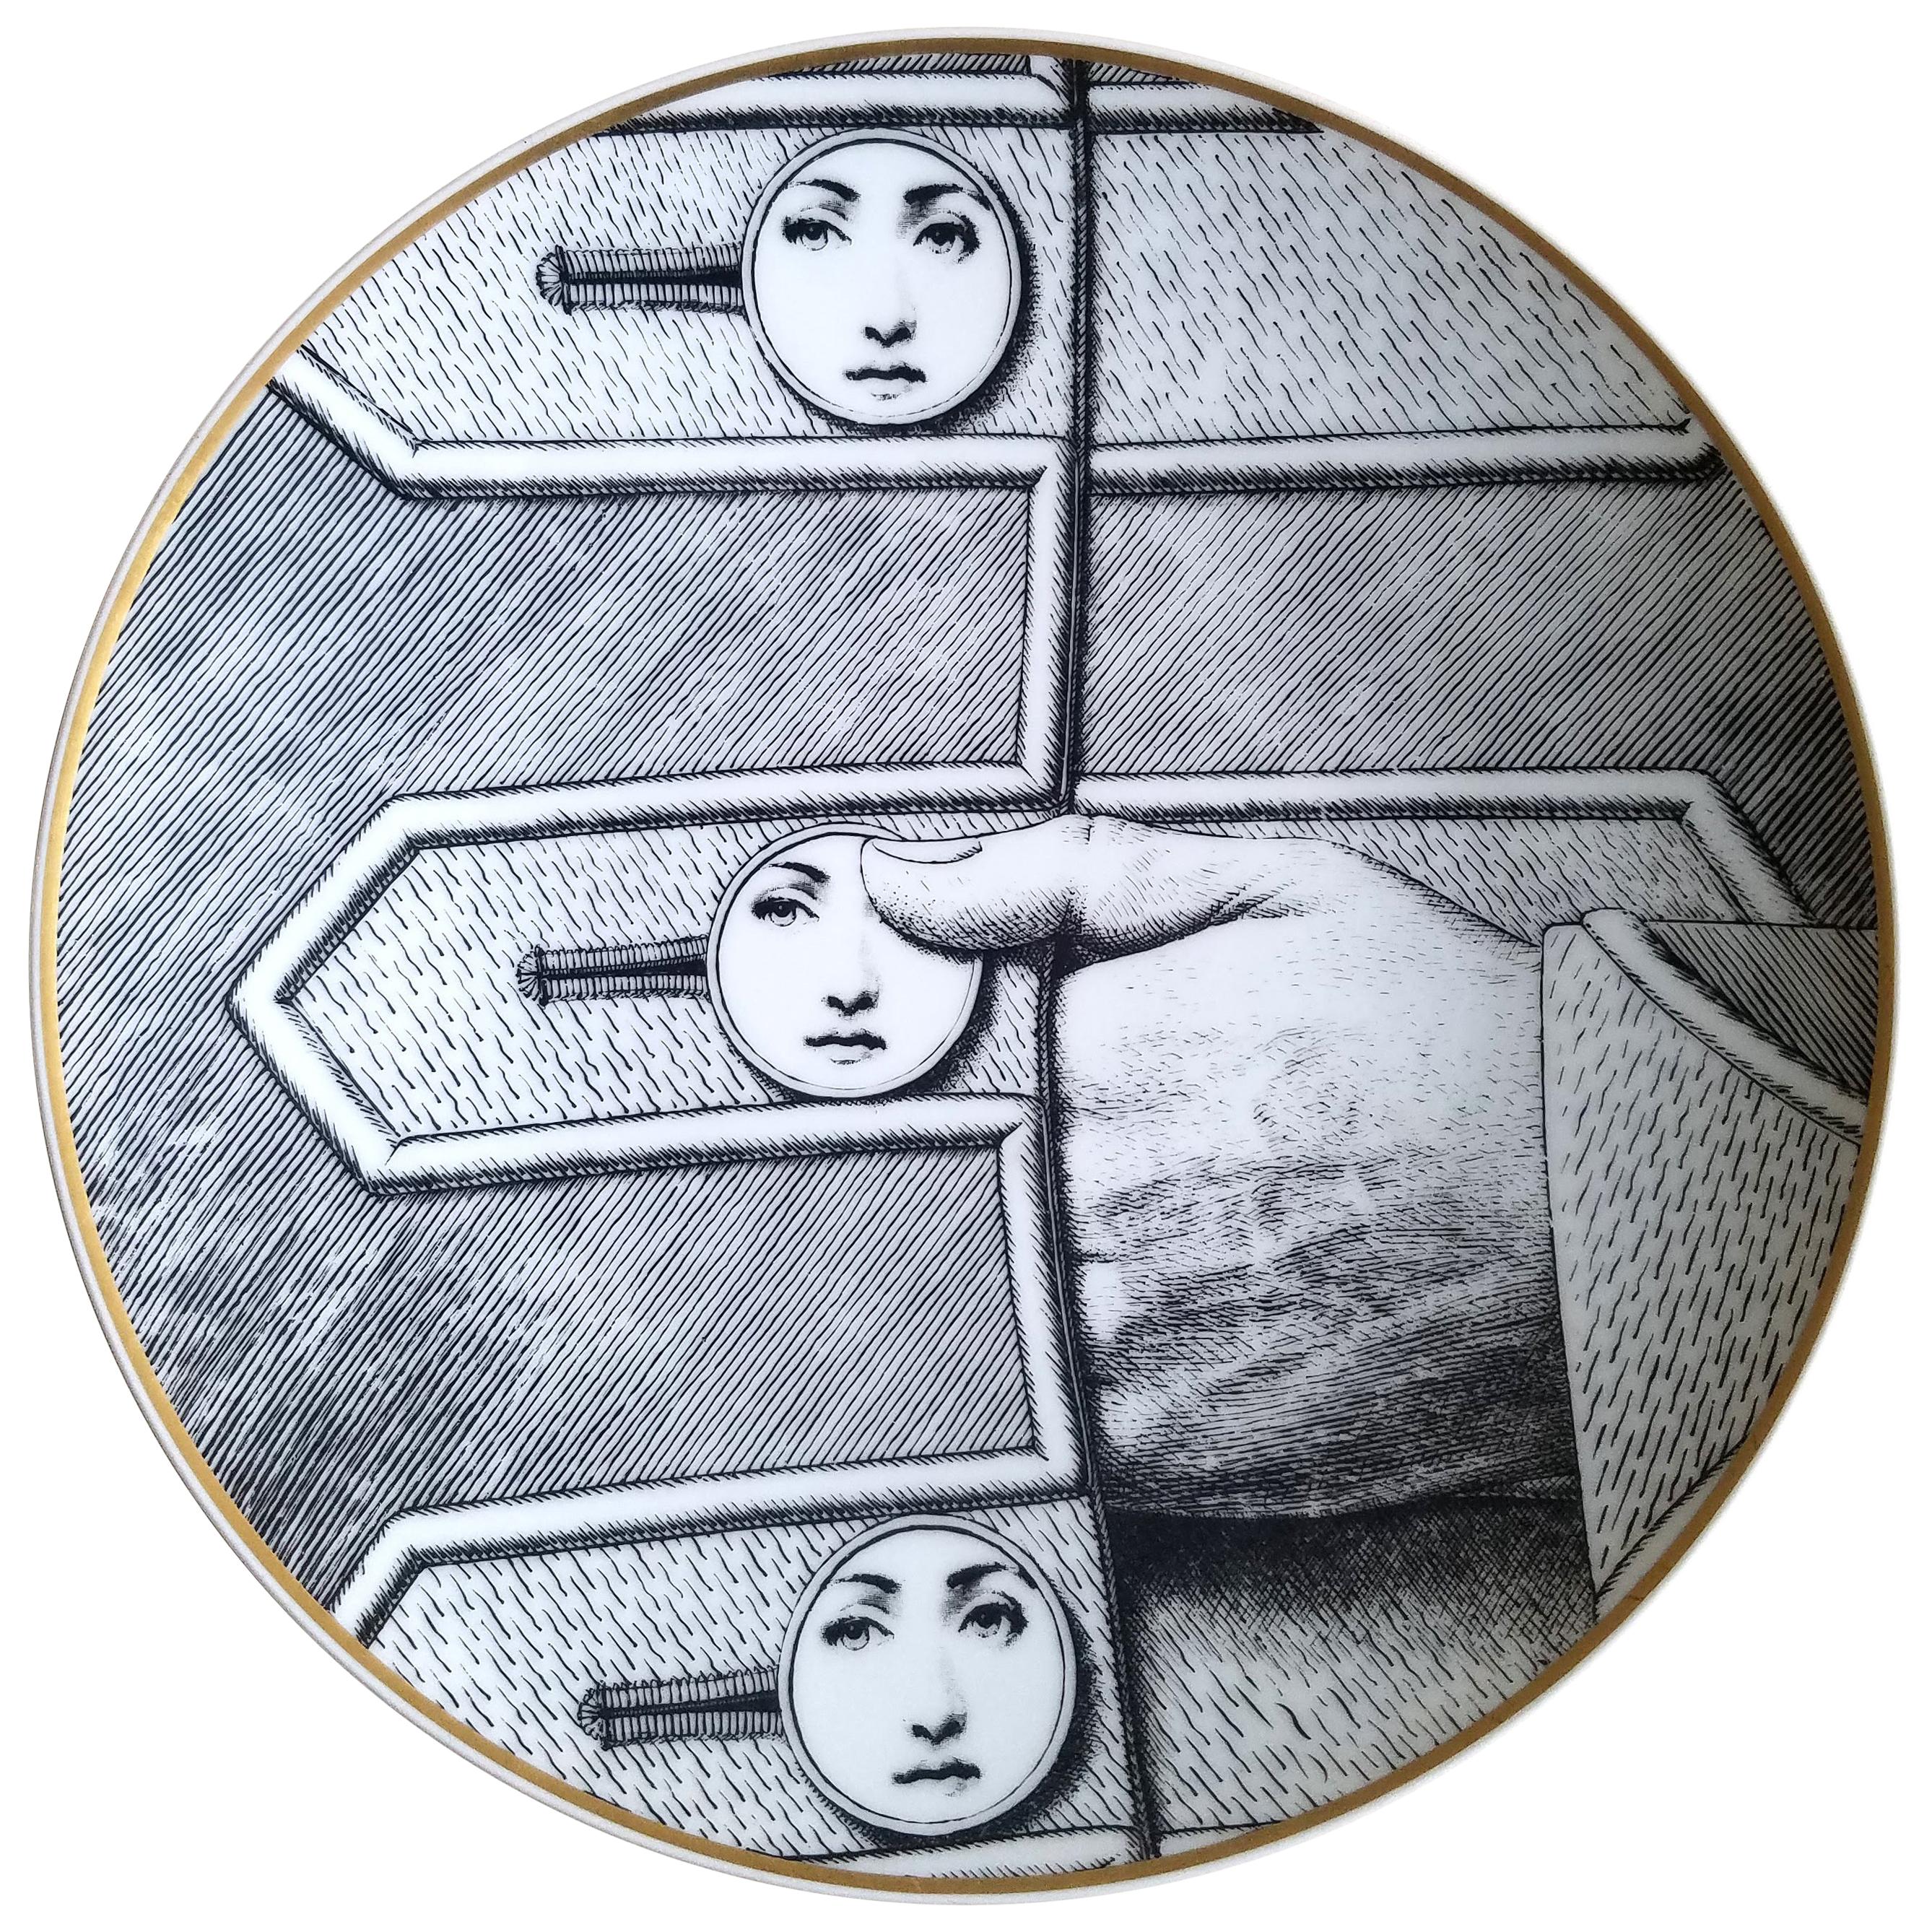 Rosenthal Fornasetti Porcelain Plate, Temi e Variazioni, Themes and Variations